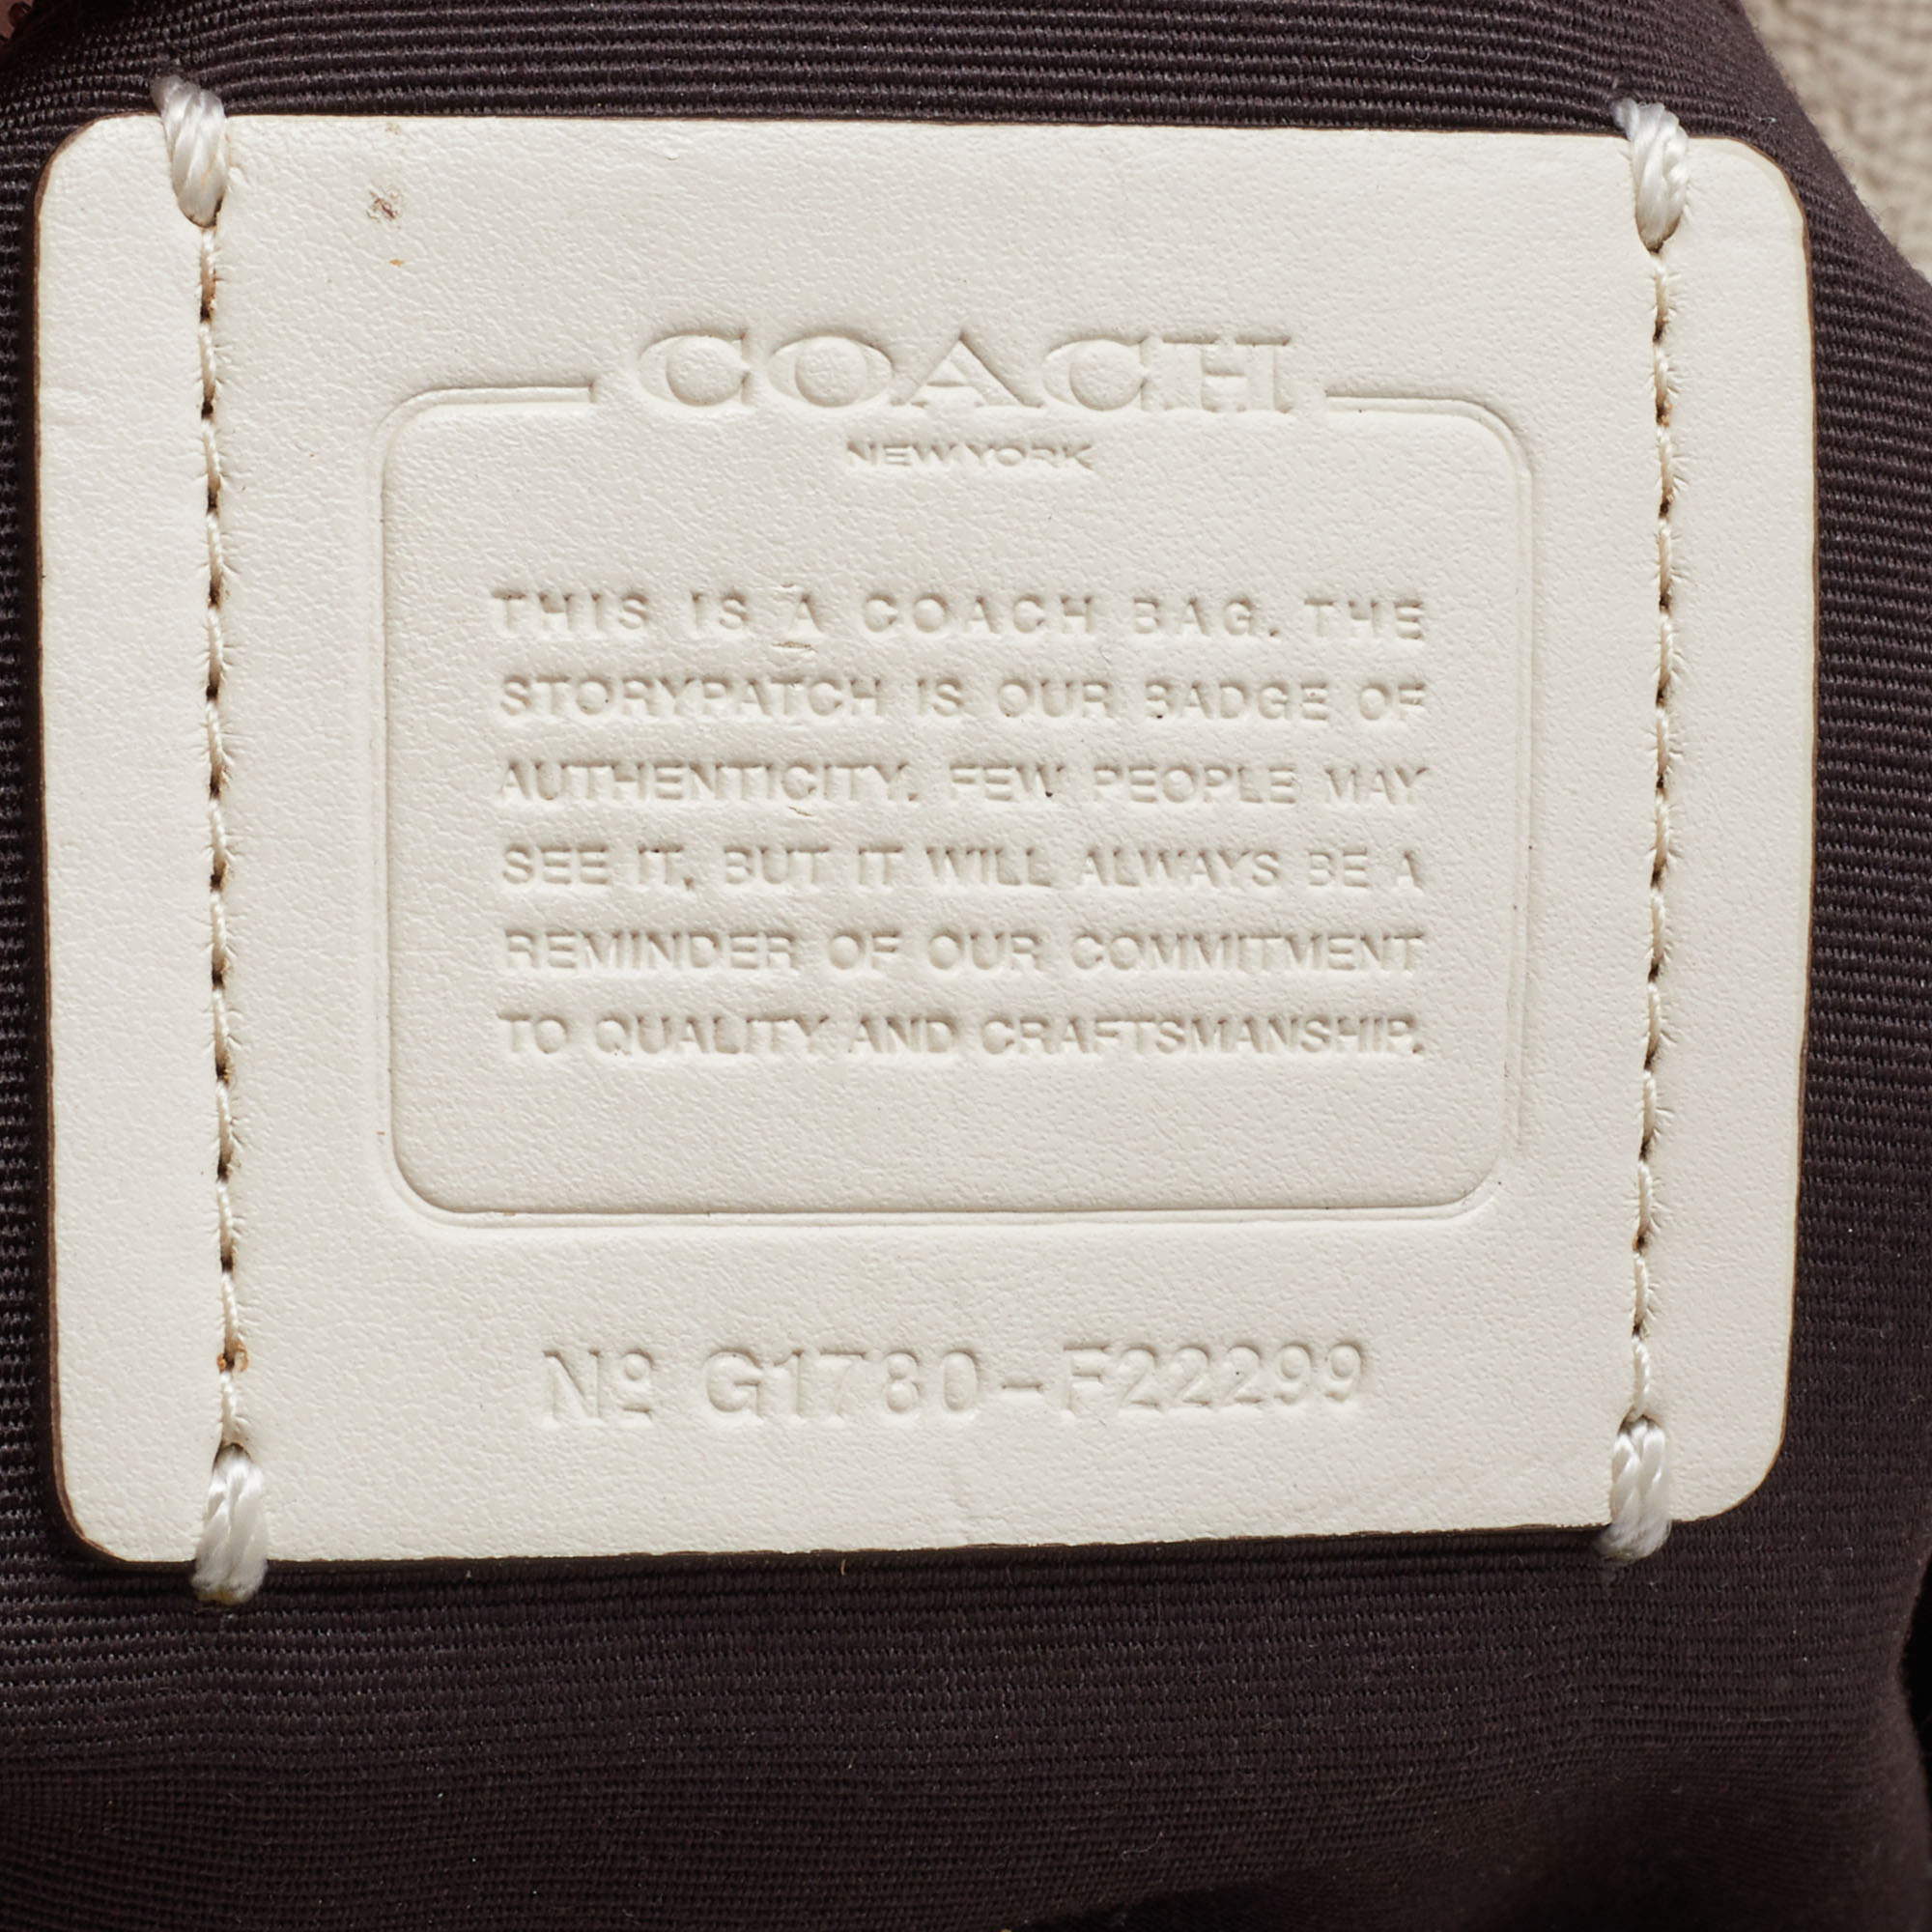 Coach Ivory Leather Stardust Studs City Zip Tote